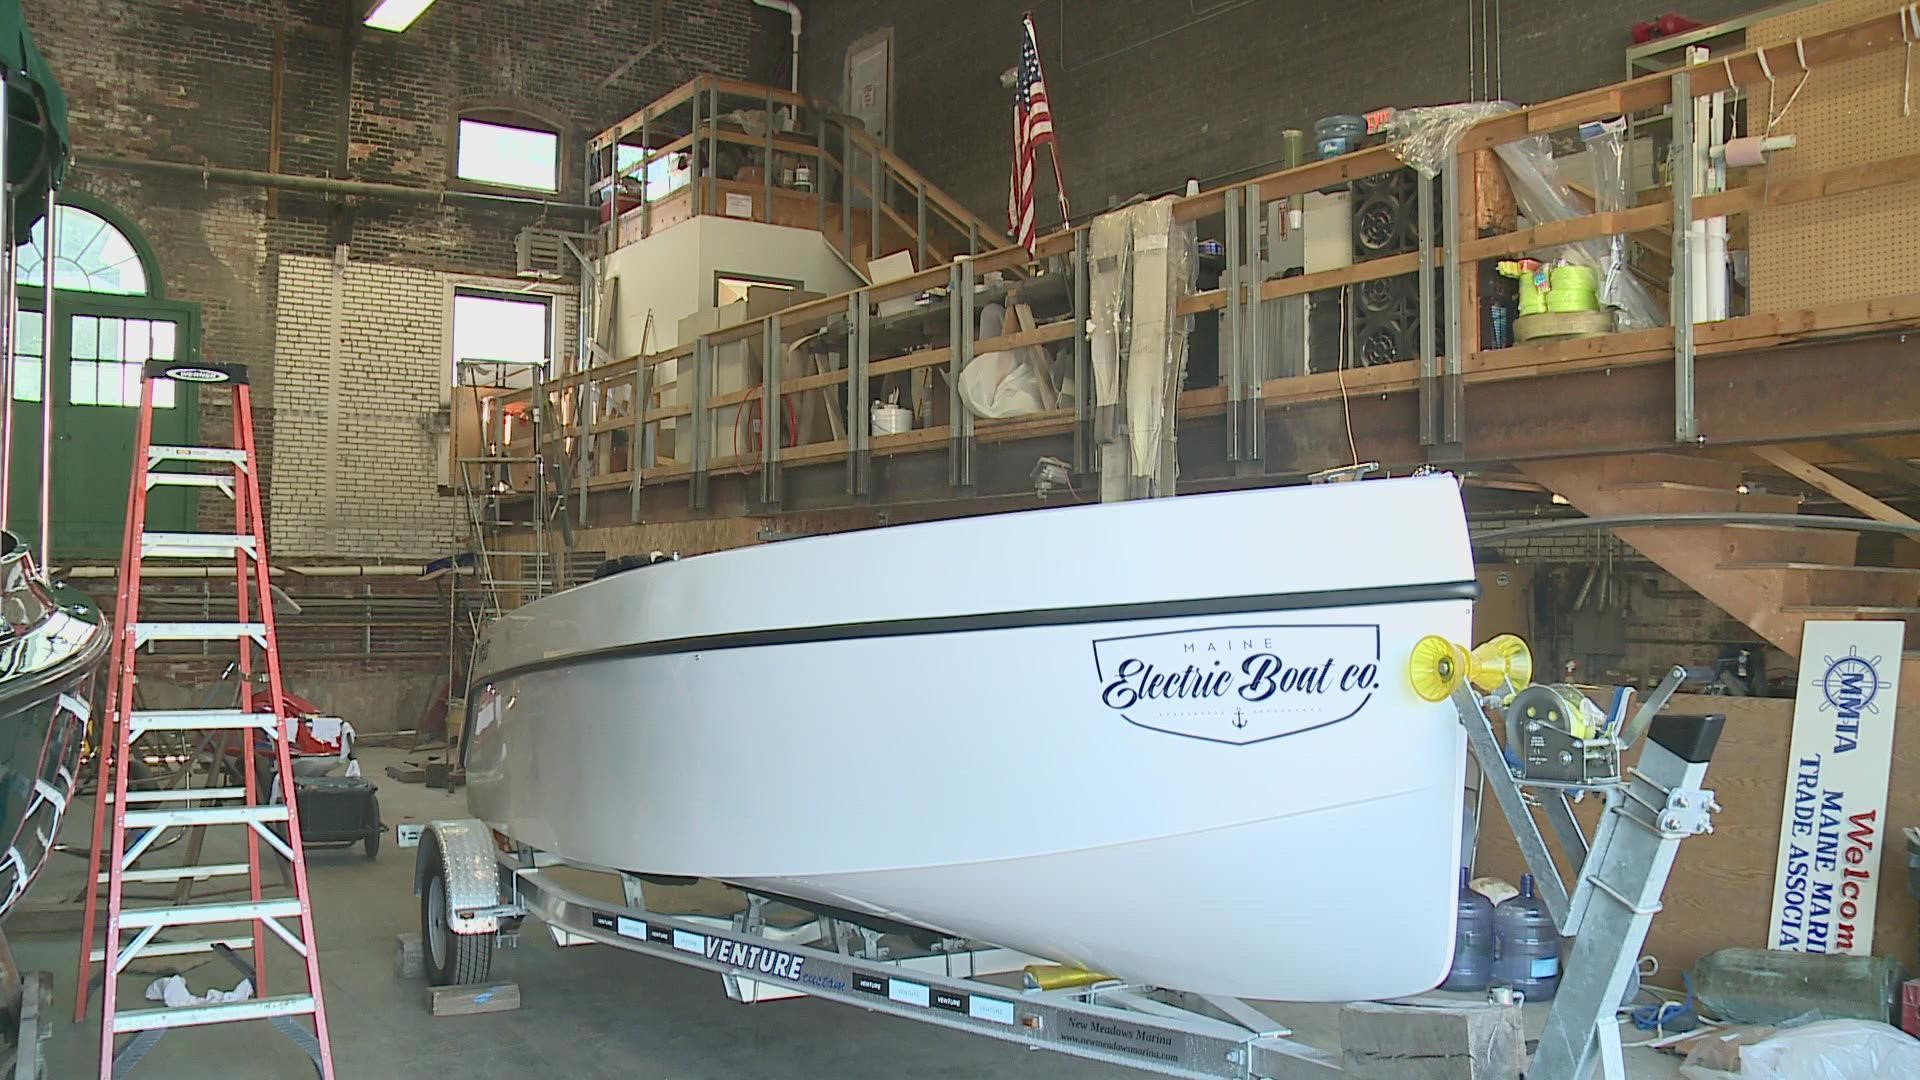 Maine Electric Boat currently sells a line of boats made in Canada, with the electric drive system made in Europe.